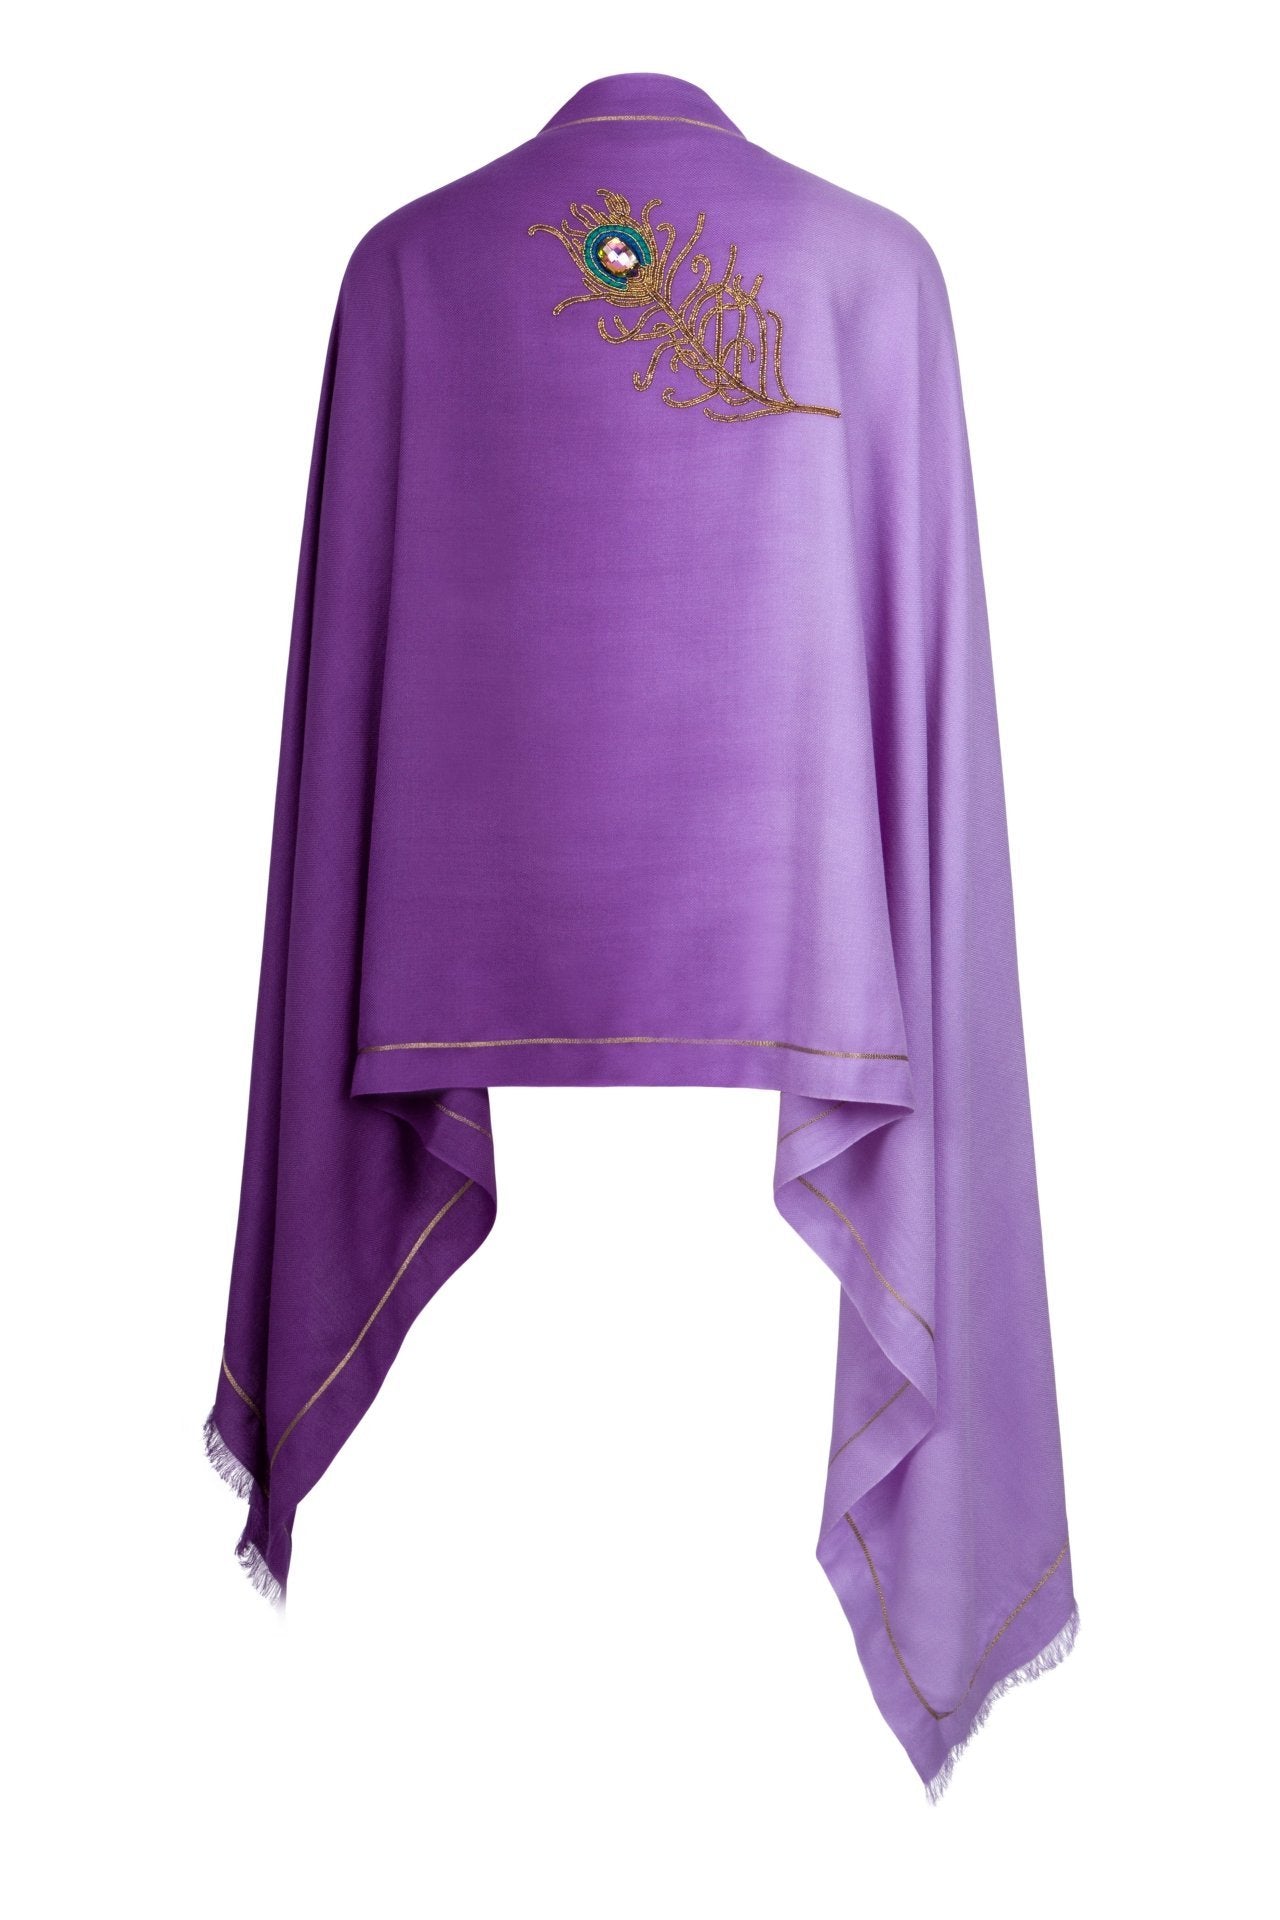 7th Heaven angel Raphael purple spiritual wrap scarf for for PROTECTION, STRENGTH and COURAGE